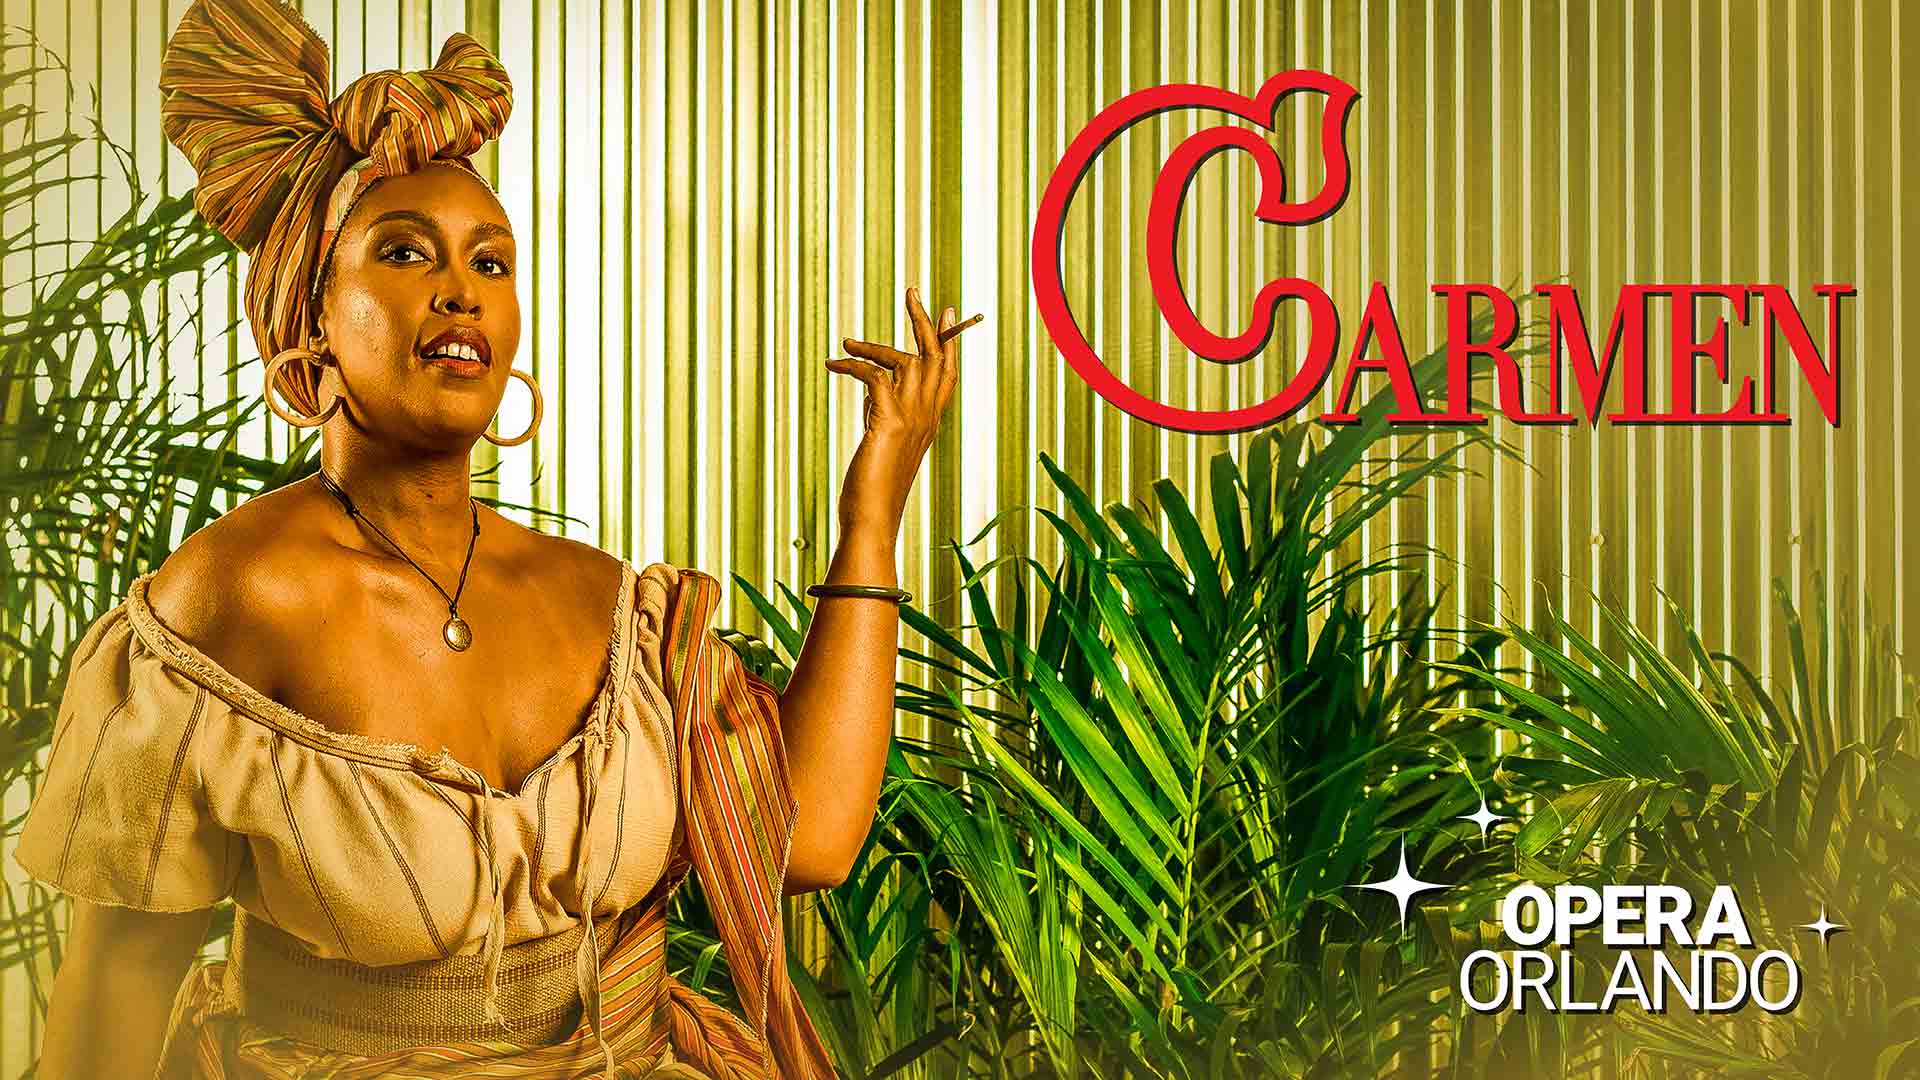 Carmen takes the stage at Dr. Phillips Center on April 1 and 3